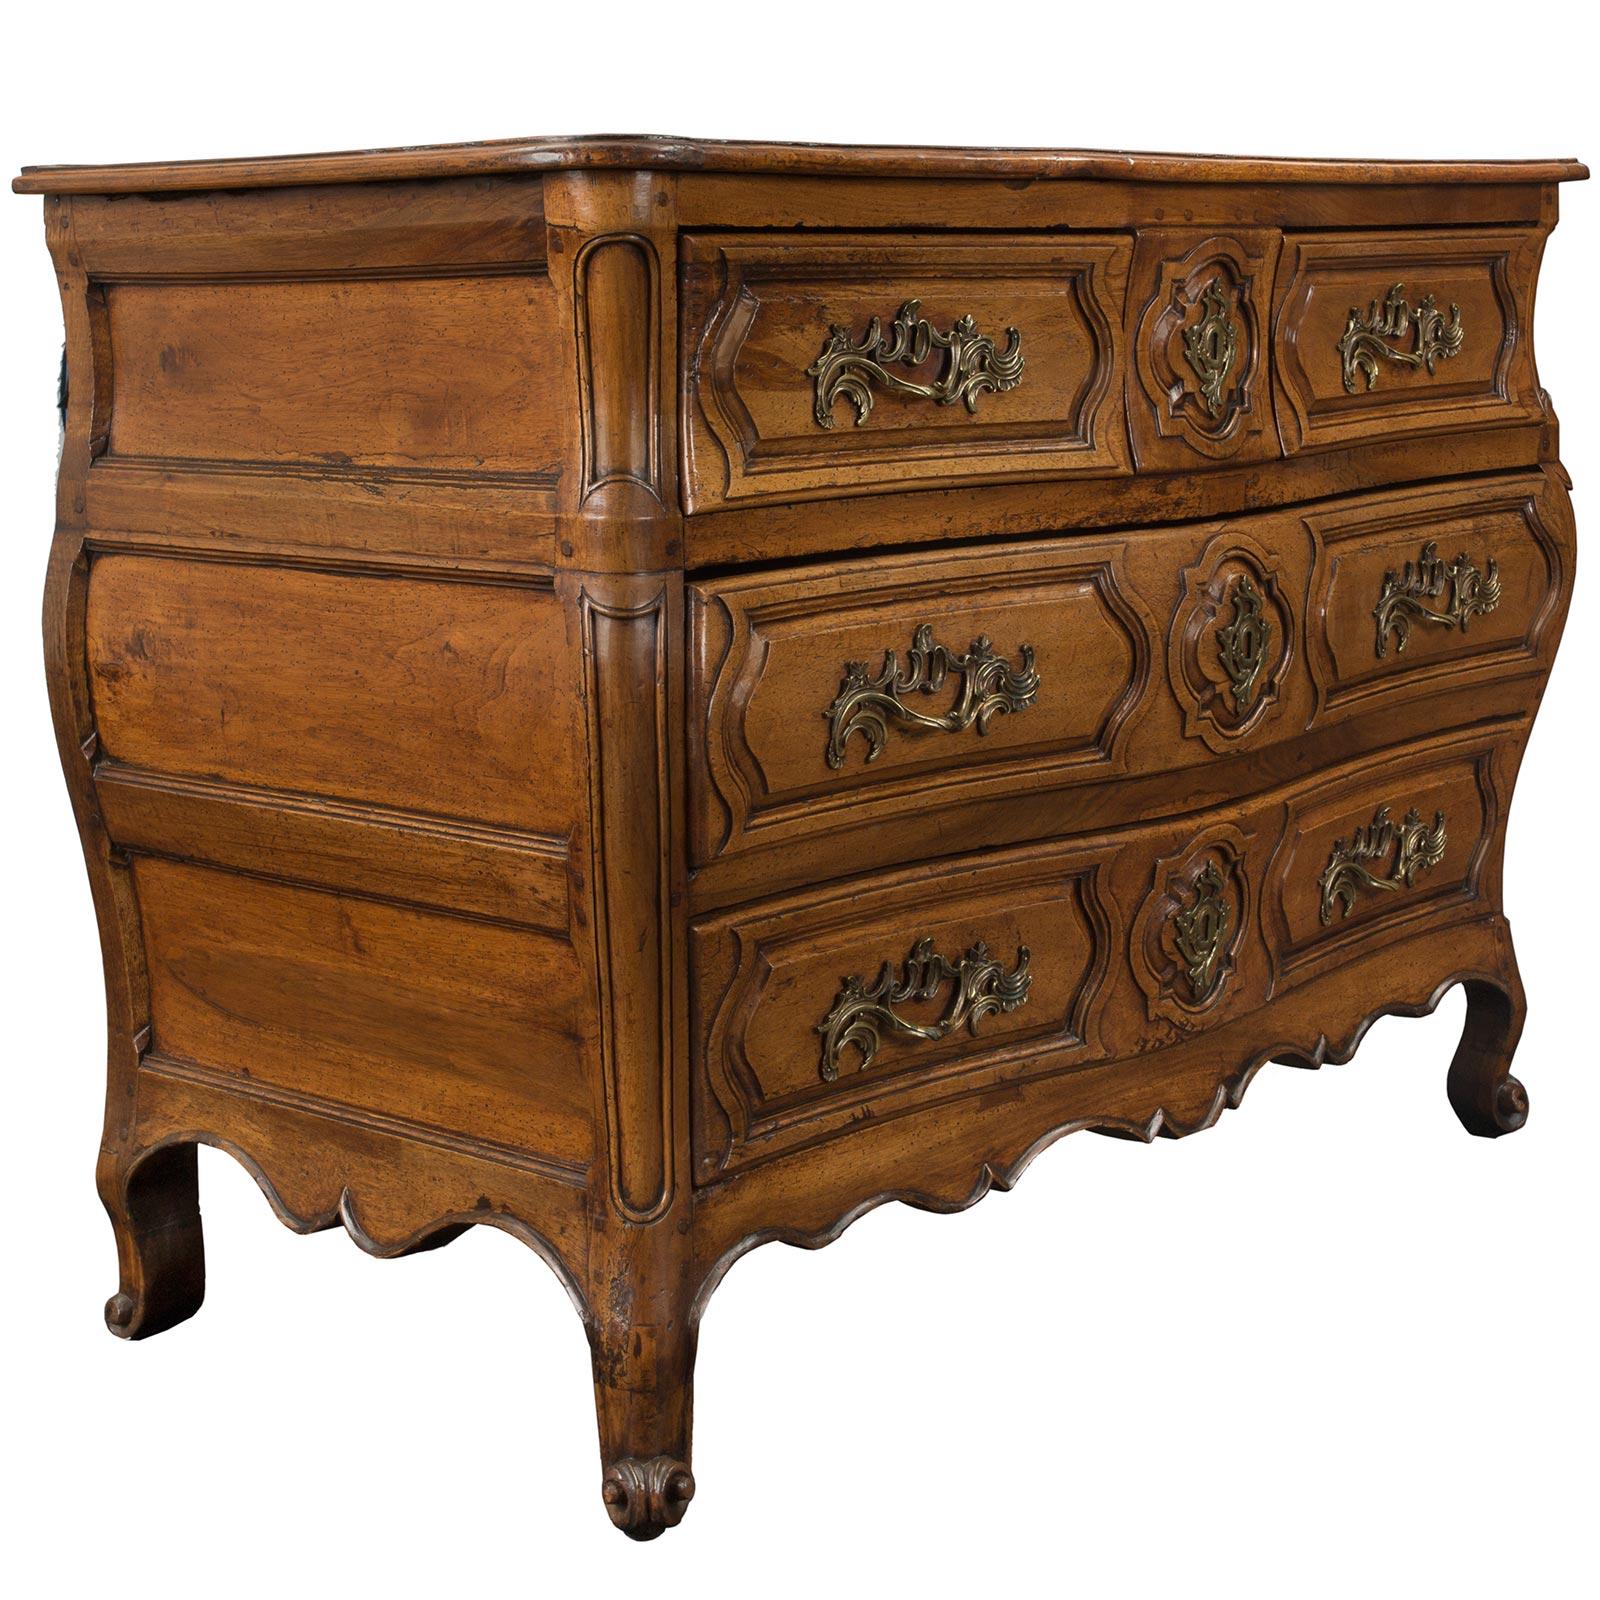 Patinated French Mid-18th Century Louis XV Period Walnut Commode with Bronze Hardware For Sale